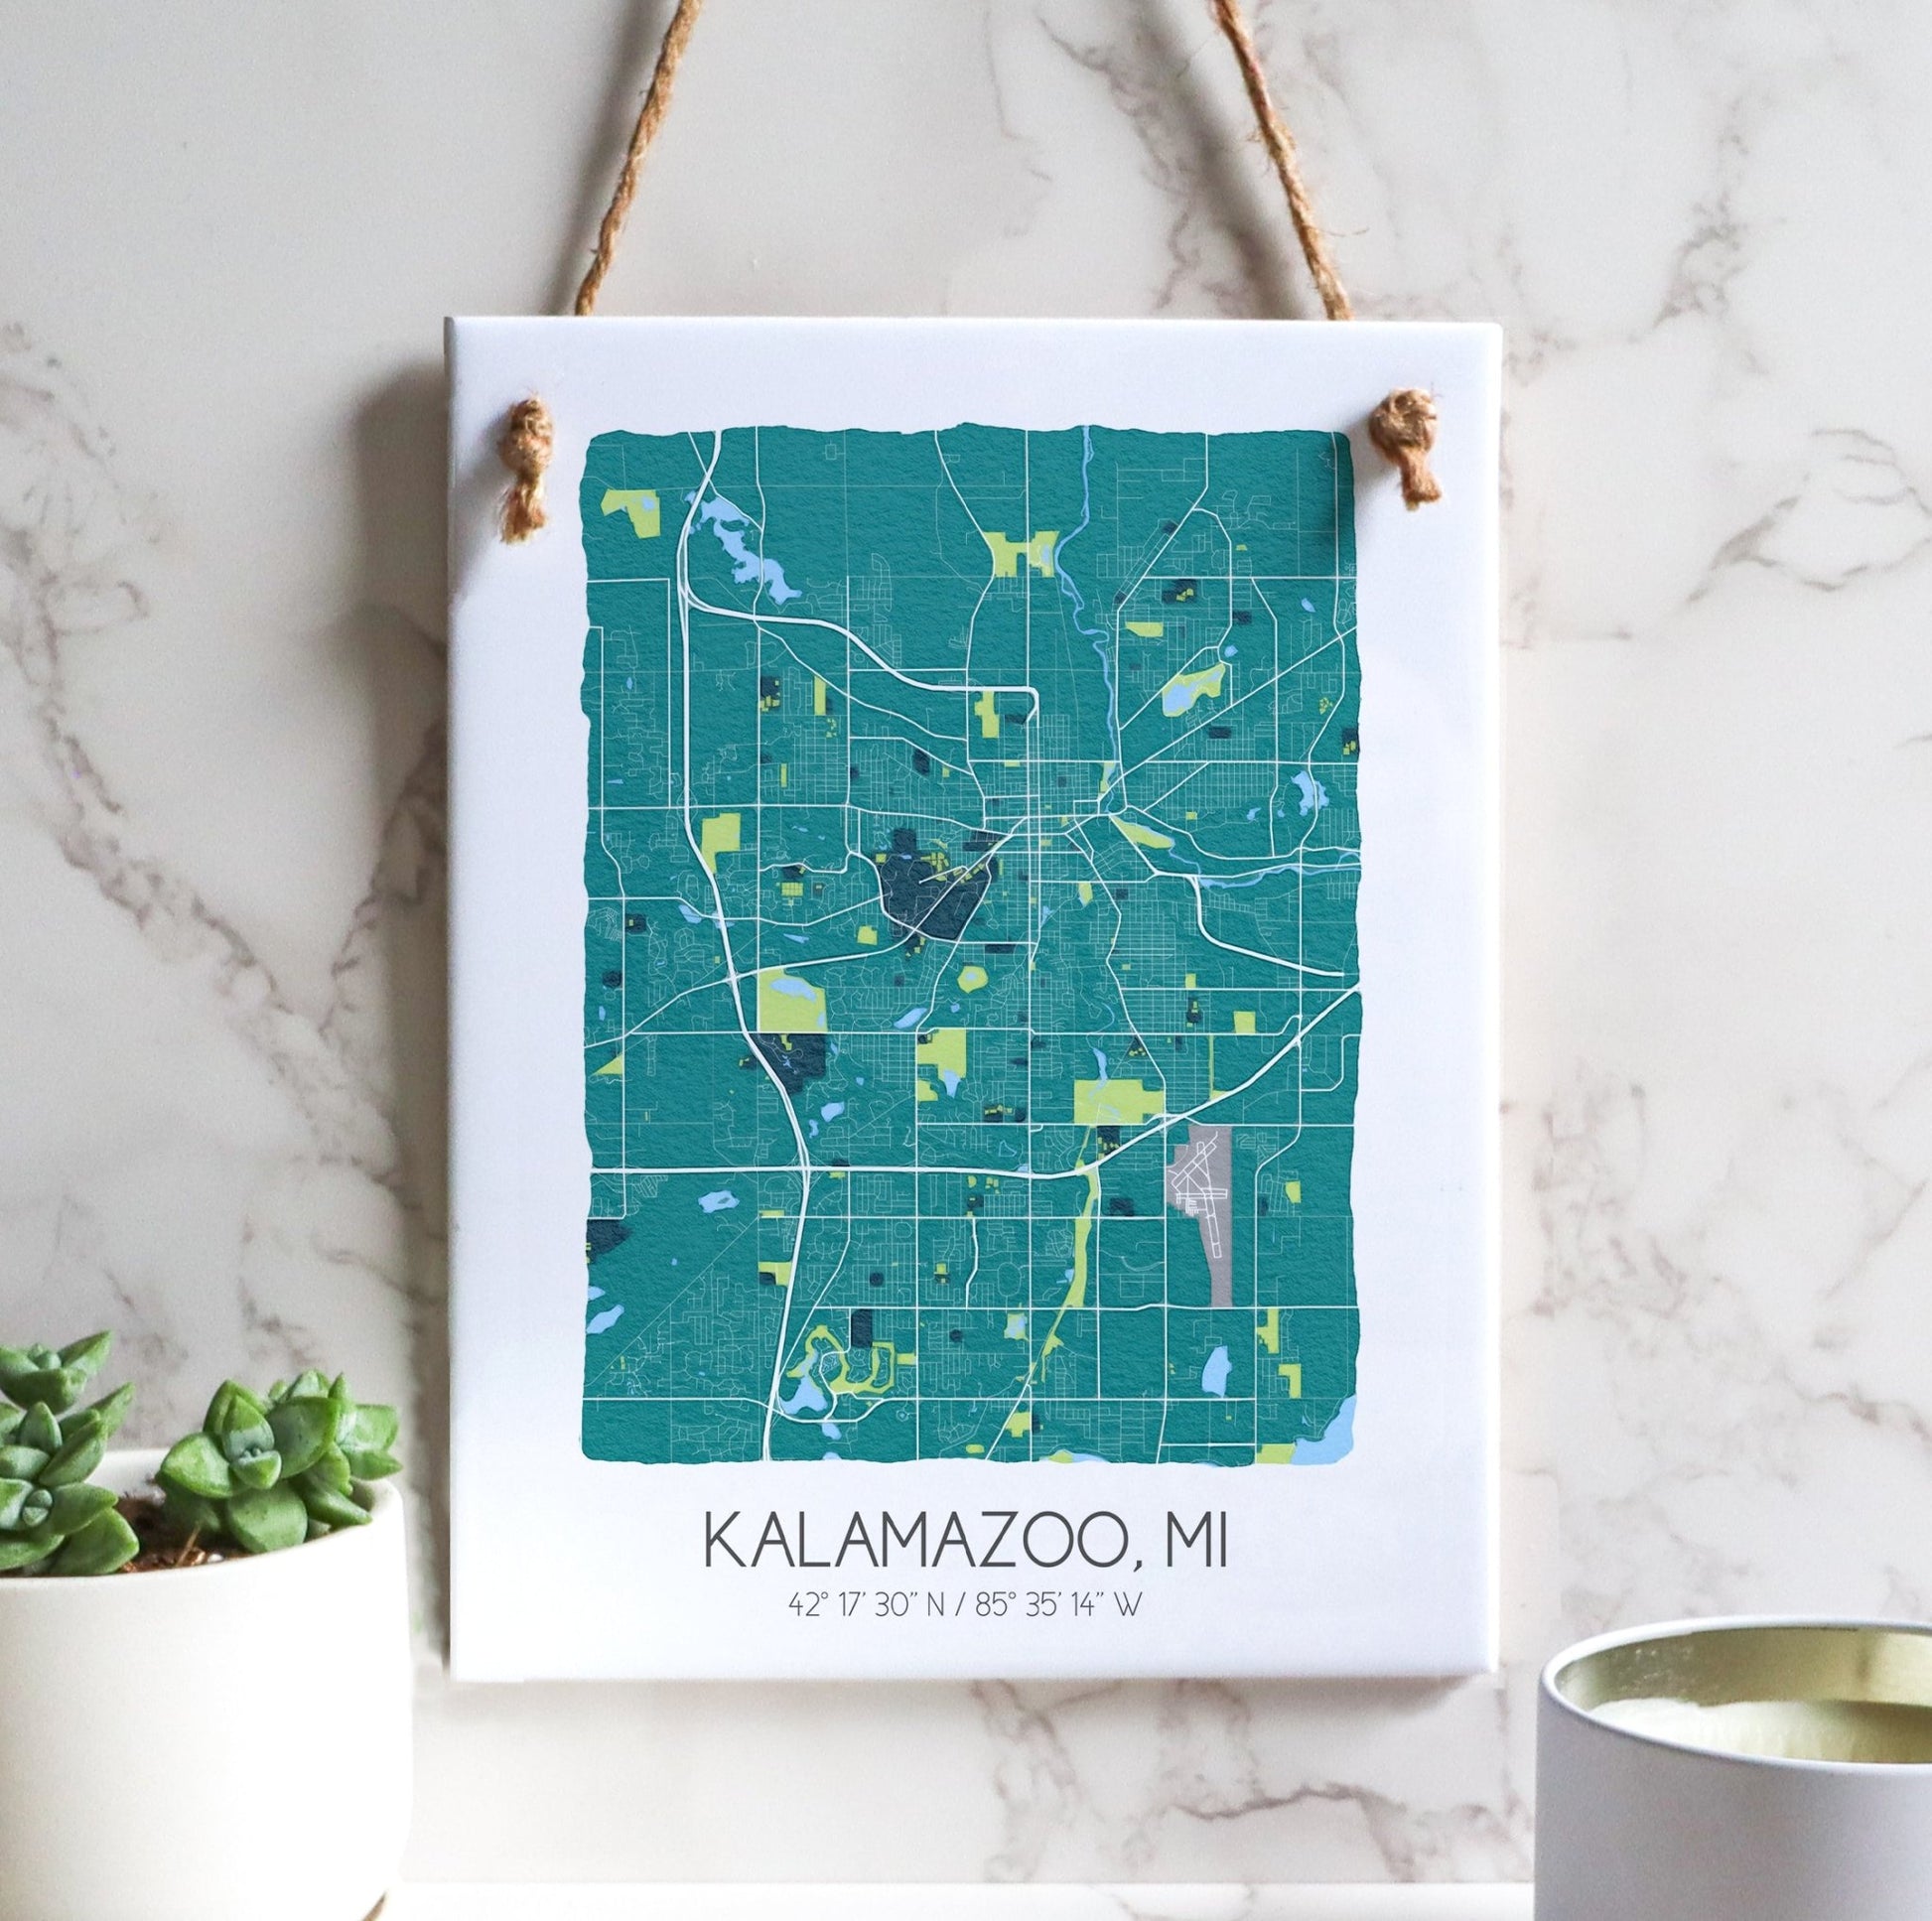 A Kalamazoo MI city map on a ceramic rectangle tile sign hanging on a wall, in teal